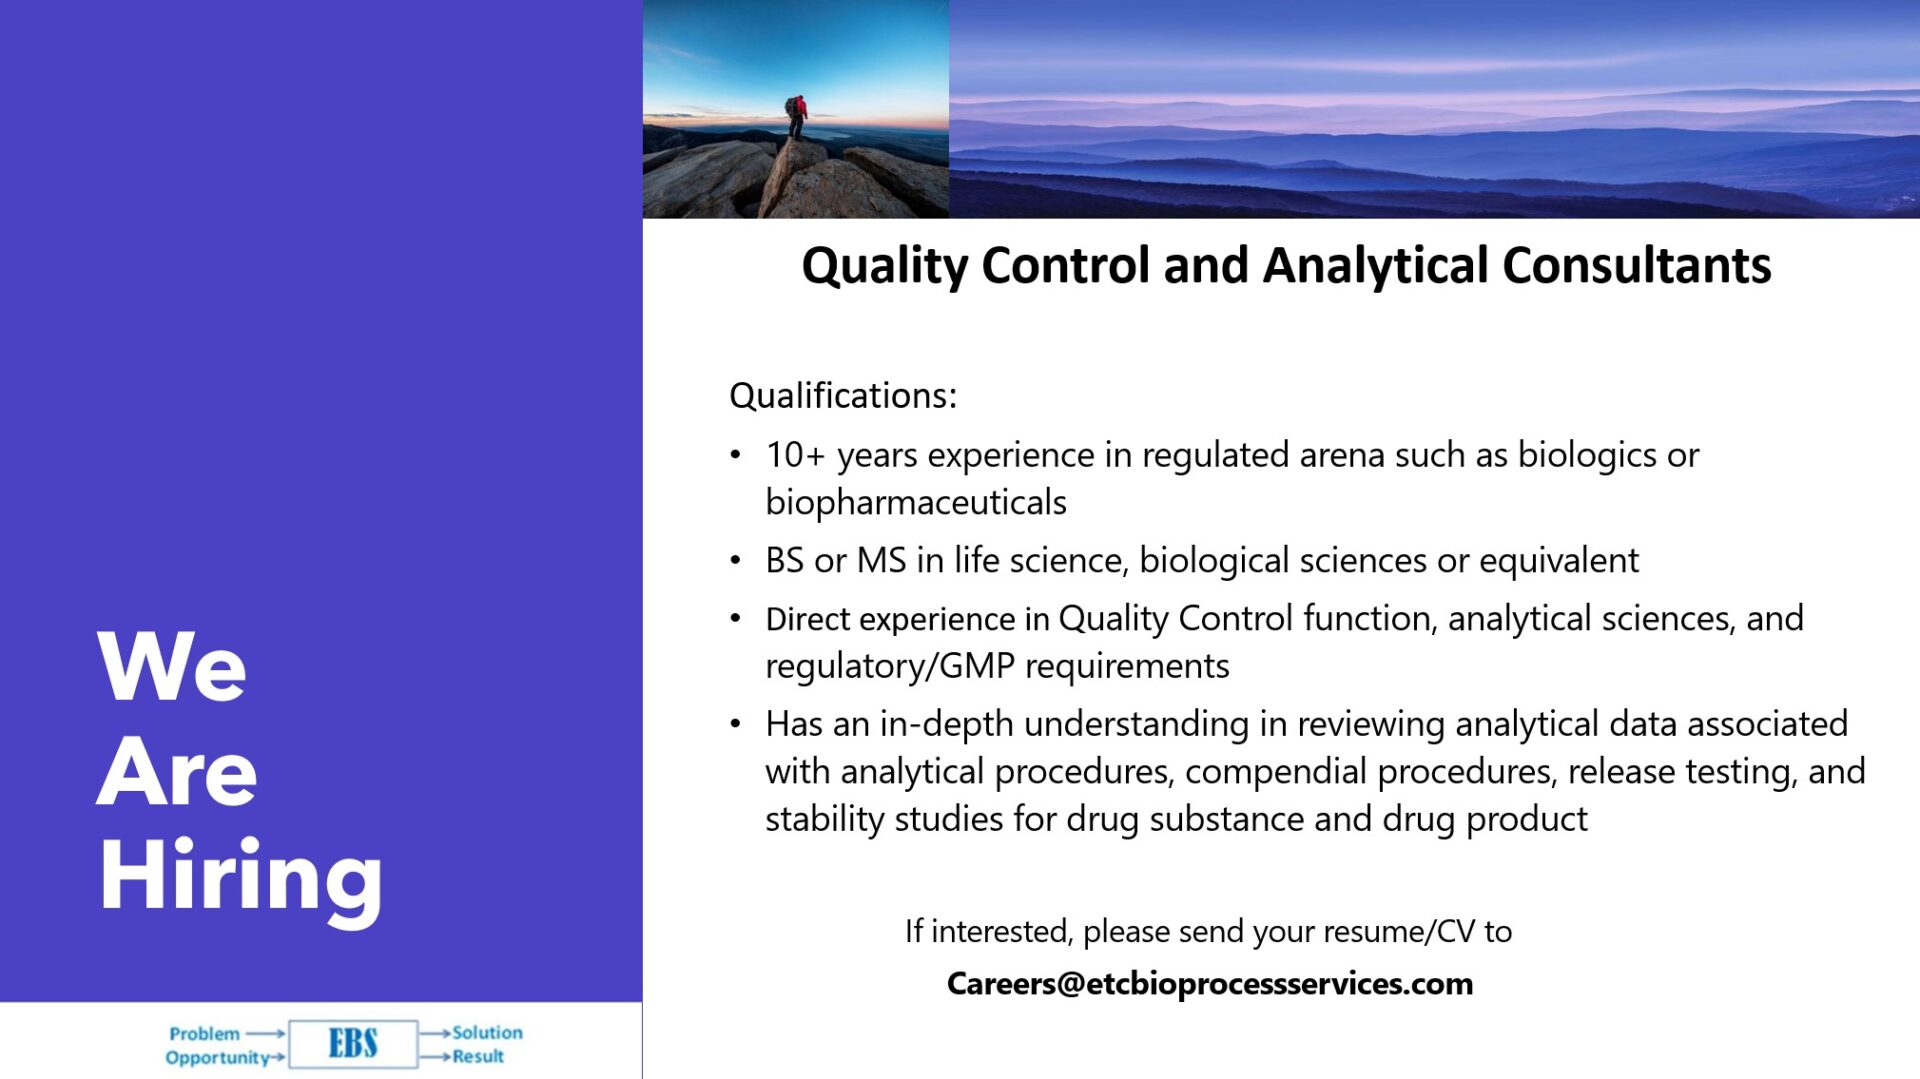 Quality Control and Analytical Consultants